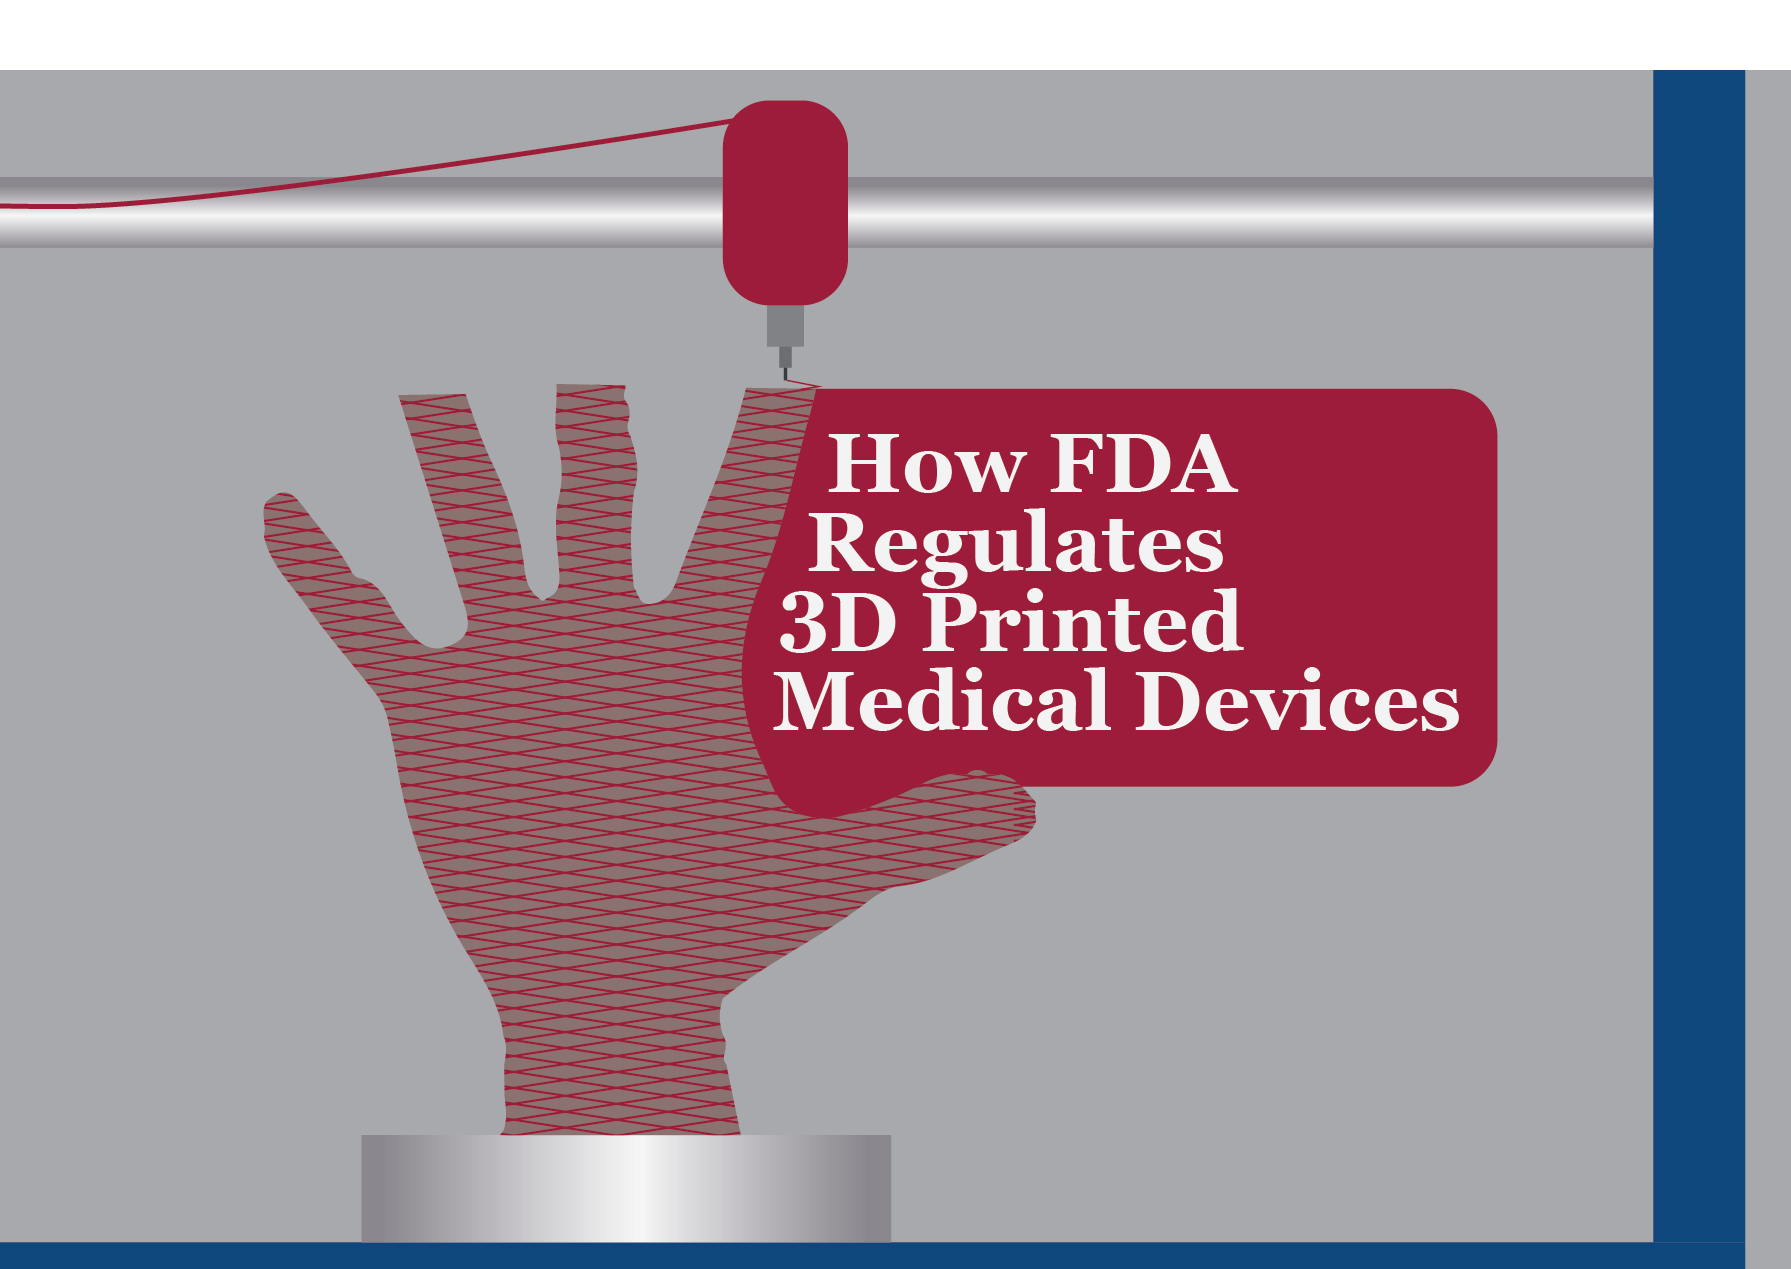 How FDA Regulates 3D Printed Medical Devices